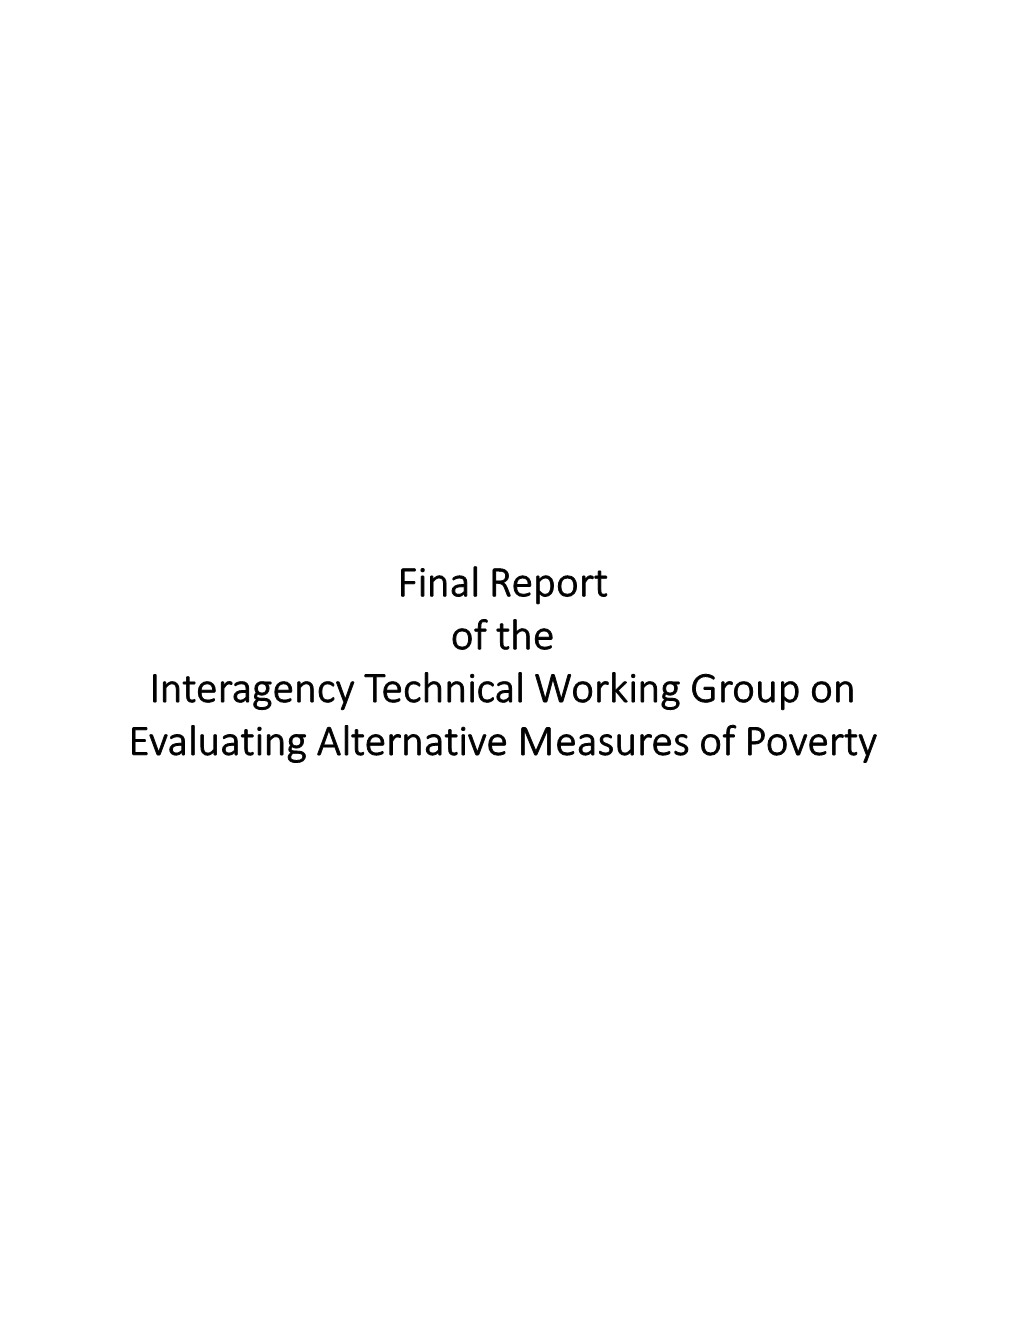 Final Report of the Interagency Technical Working Group (ITWG)